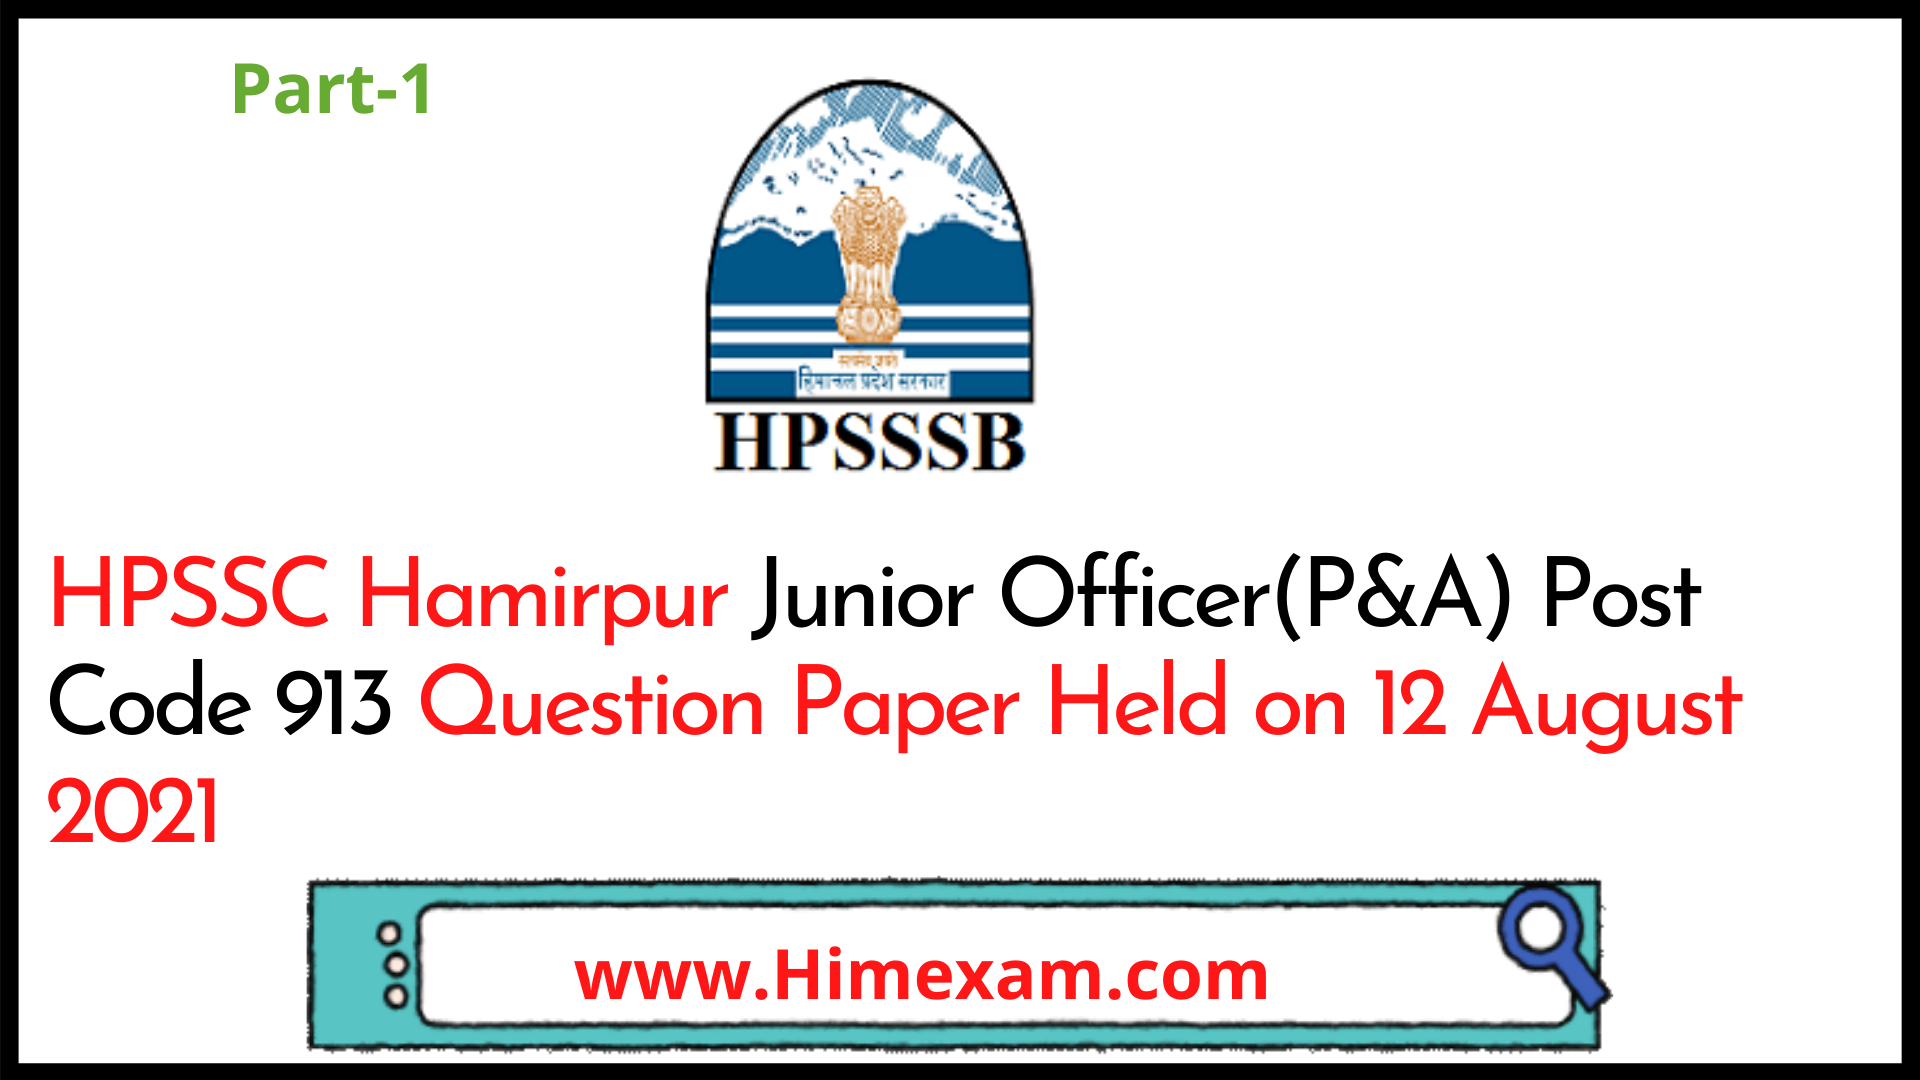 HPSSC Hamirpur Junior Officer(P&A) Post Code 913 Question Paper Held on 12 August 2021